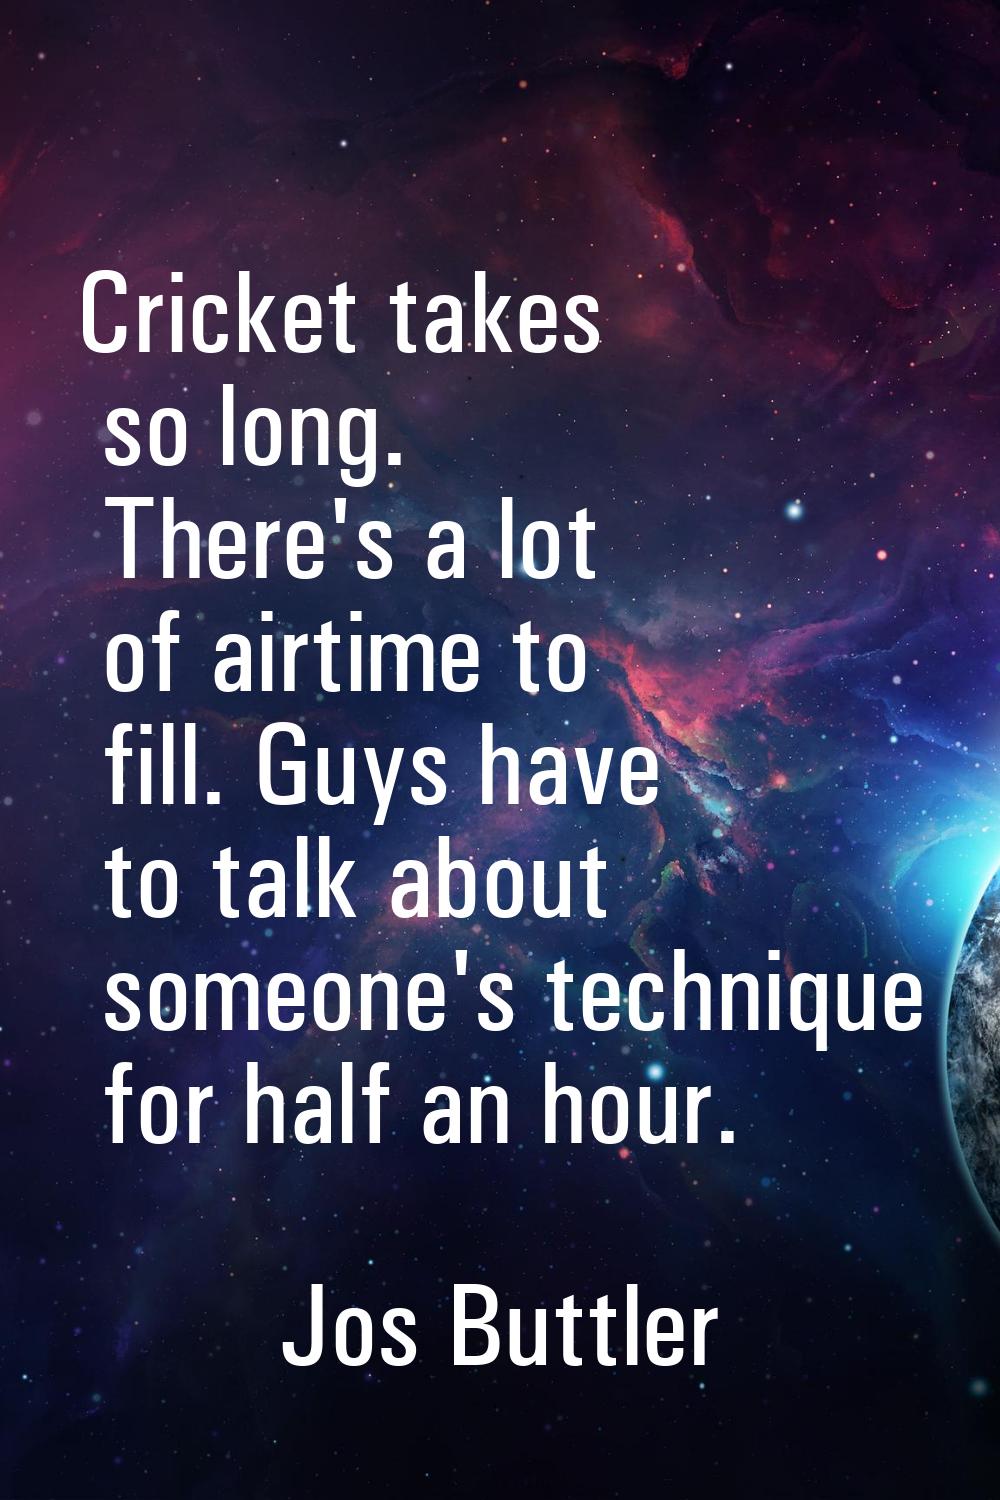 Cricket takes so long. There's a lot of airtime to fill. Guys have to talk about someone's techniqu